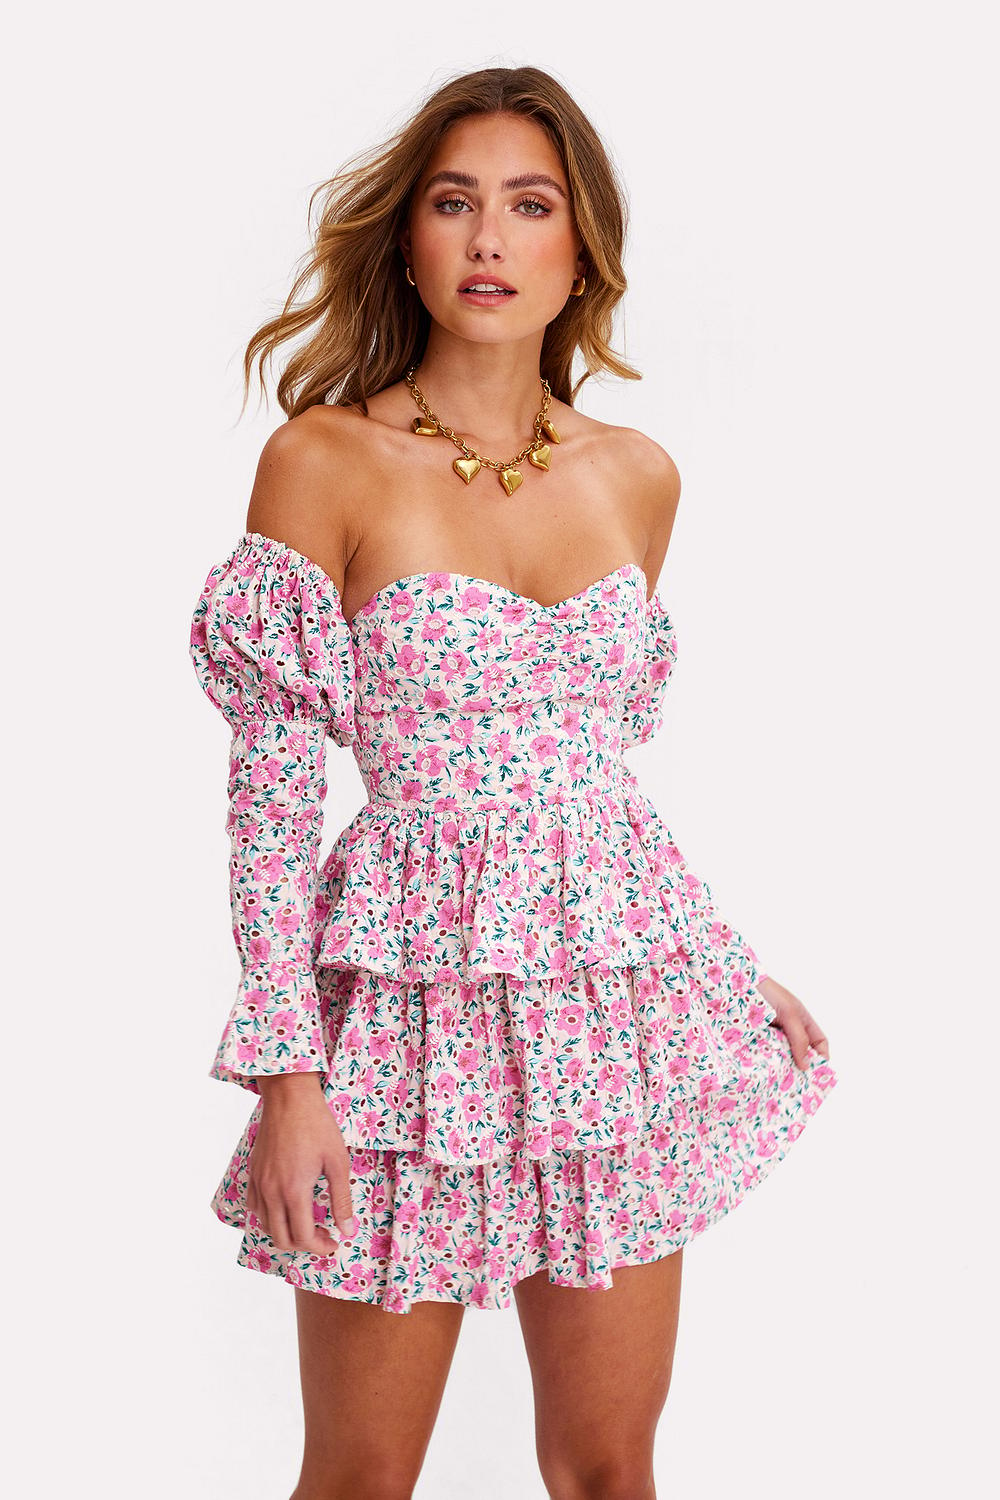 Pink dress with floral print